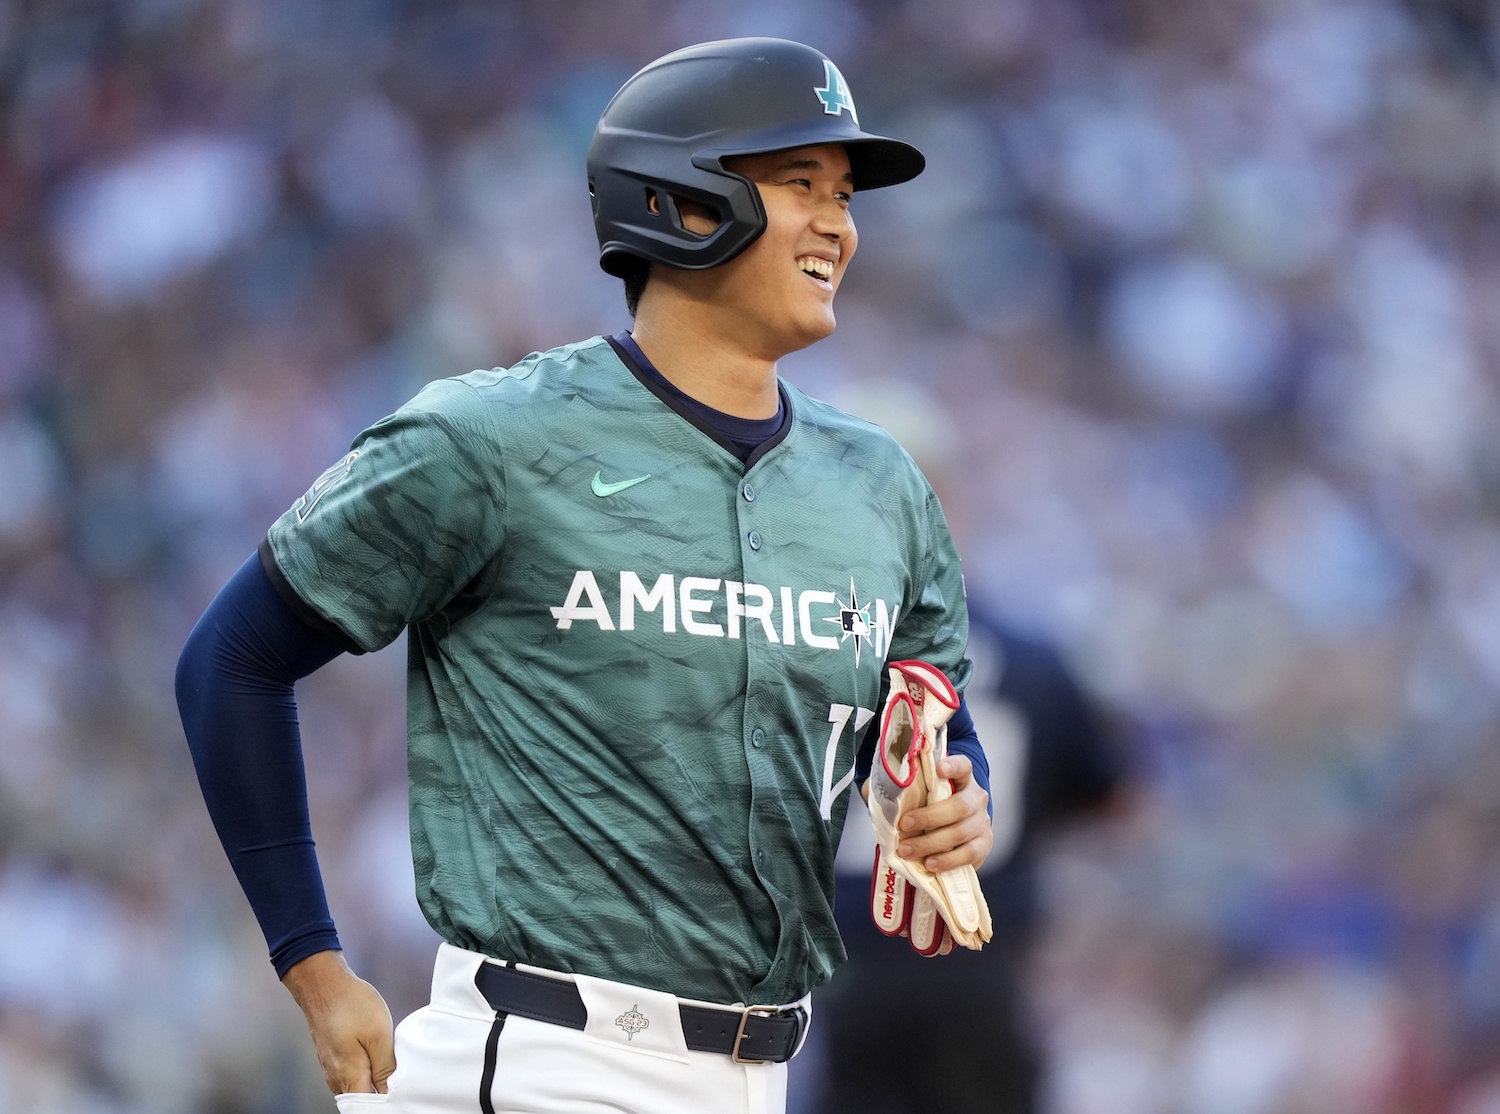 Angels News: Shohei Ohtani Was More Relaxed In 2023 MLB All-Star Game